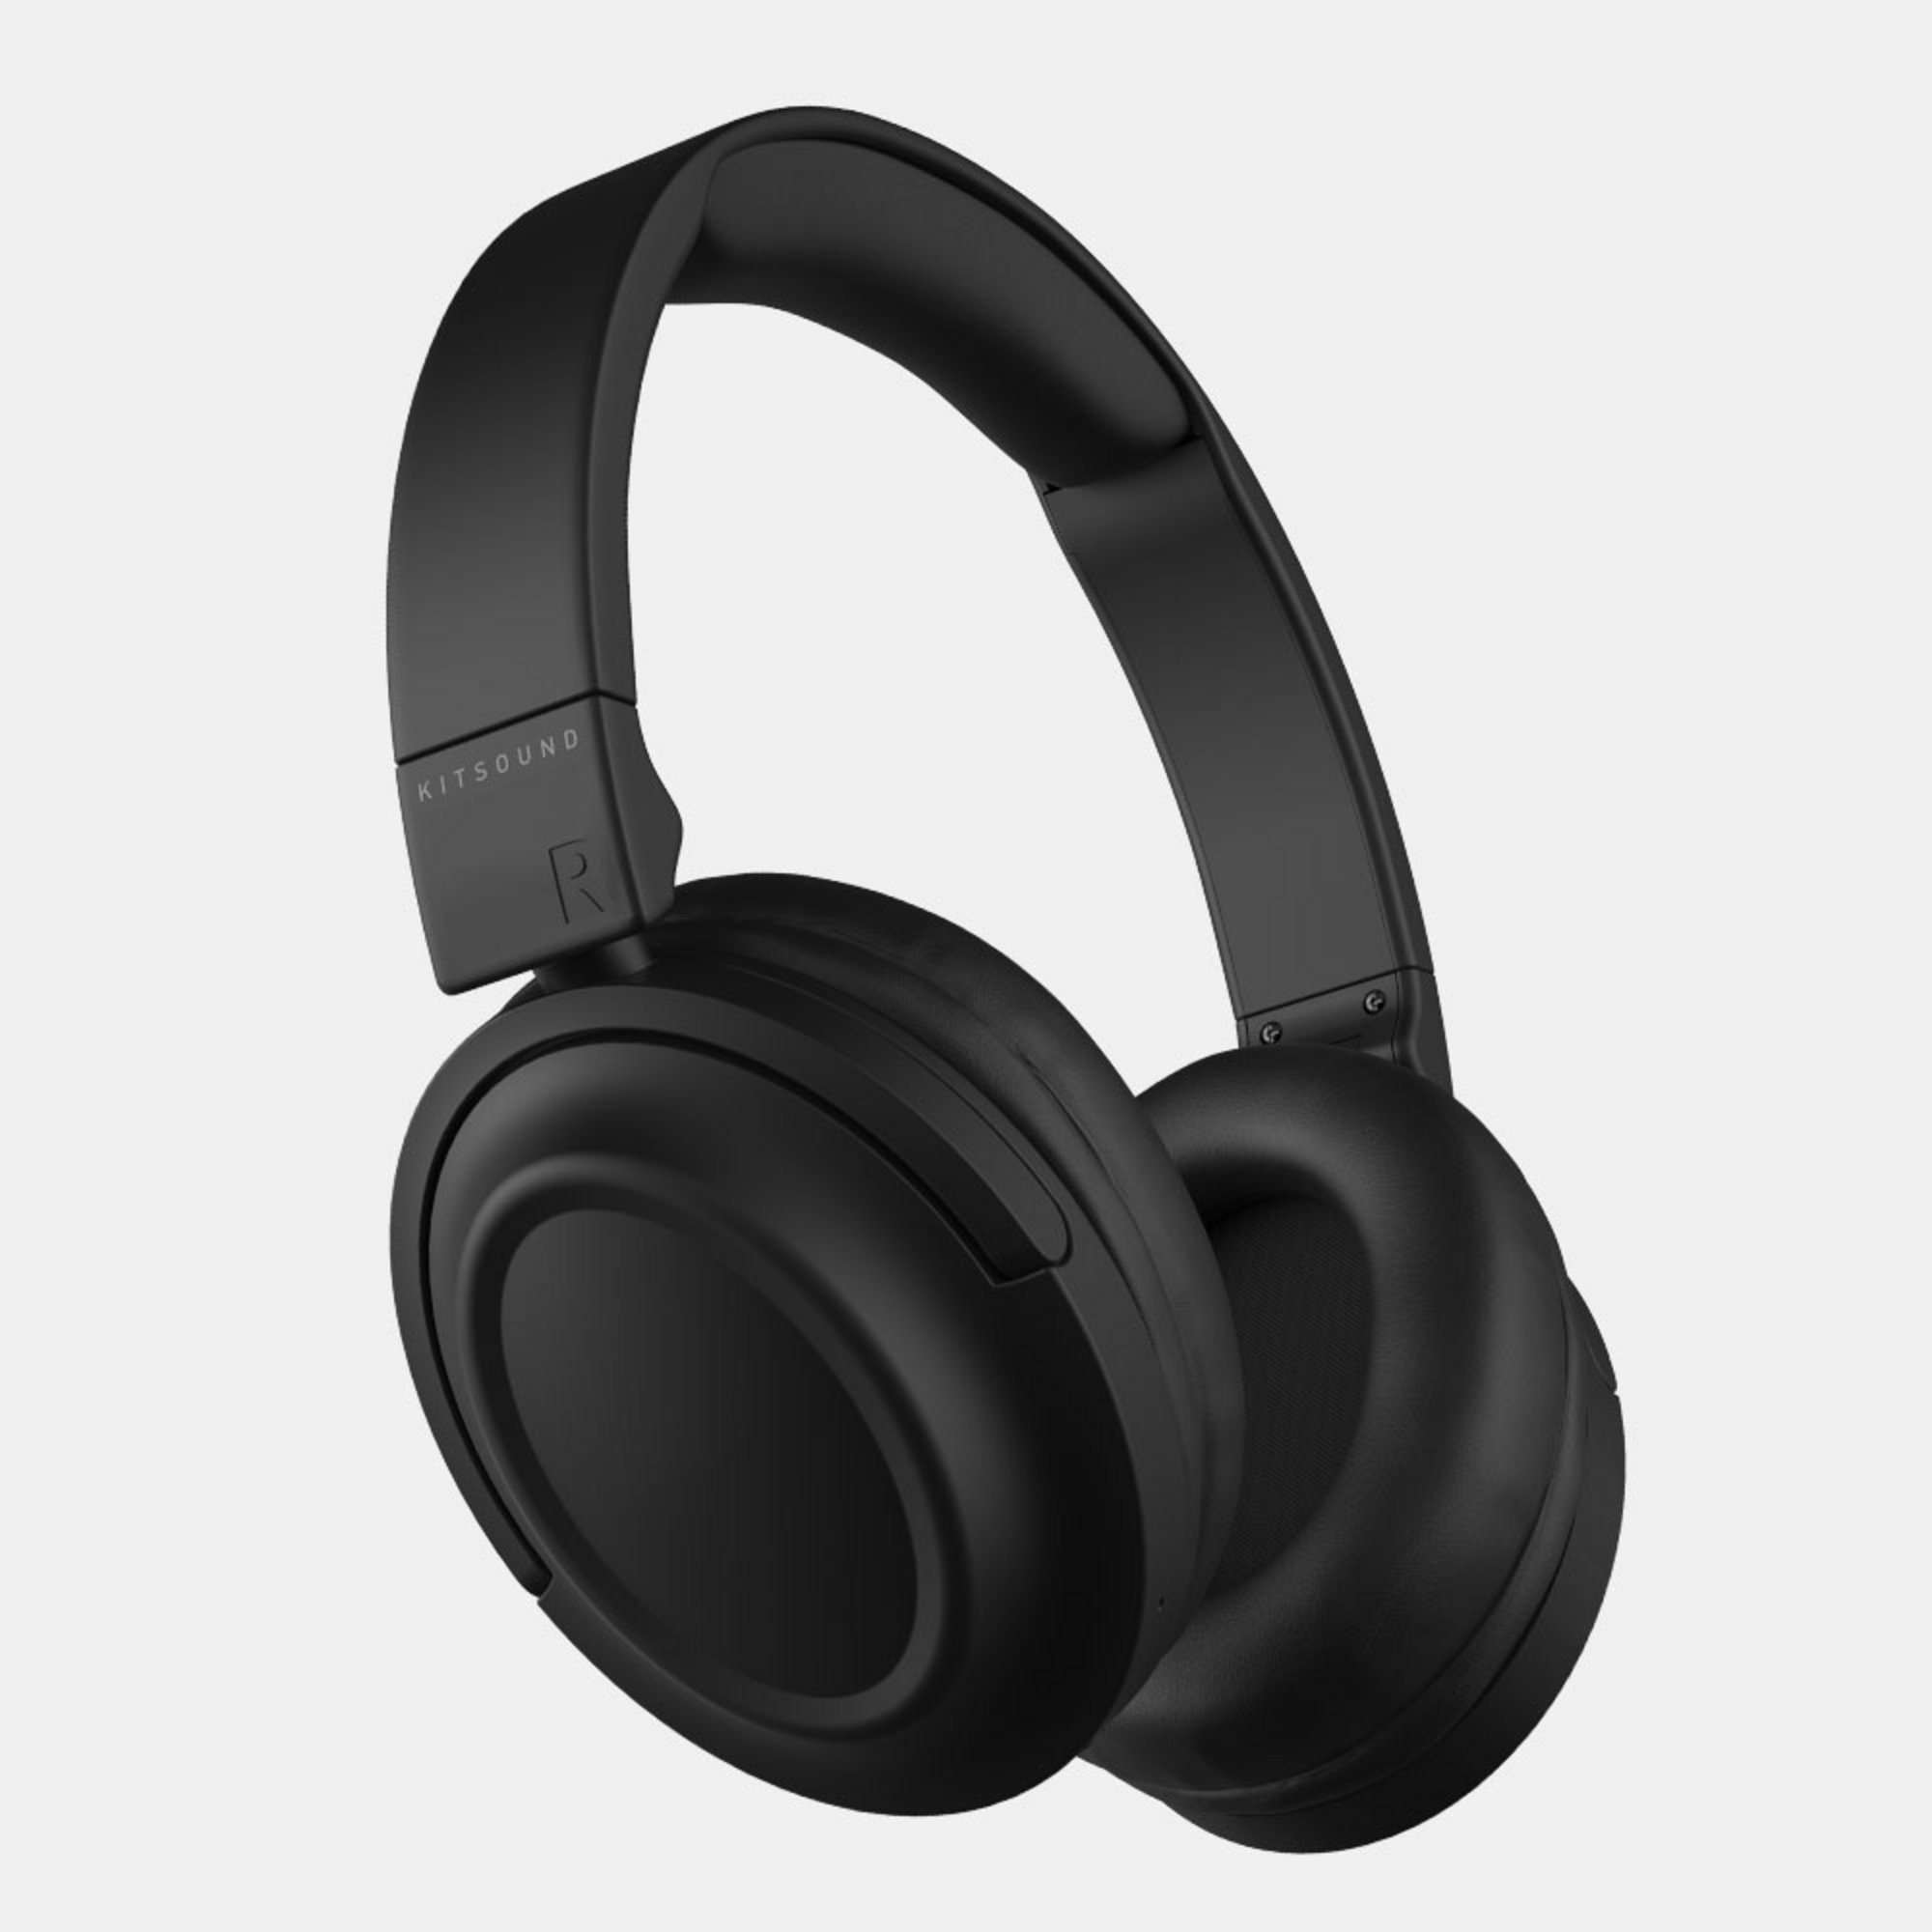 View more Edge 50 Wireless Over Ear Headphone details